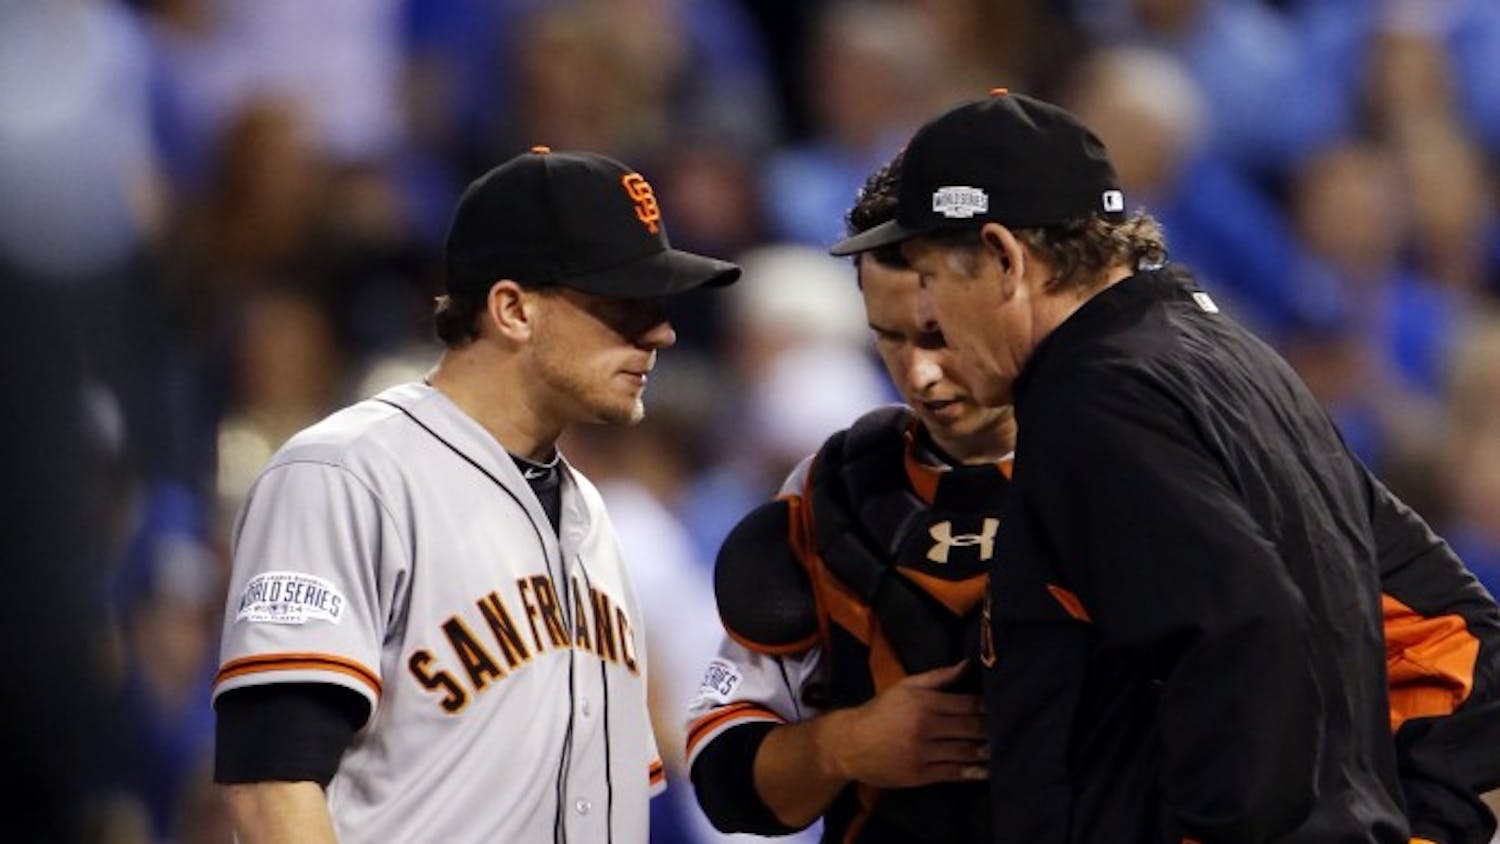 The San Francisco Giants' pitching coach Dave Righetti, right, and catcher Buster Posey visit pitcher Jake Peavy on the mound during the second inning in Game 6 of the World Series at Kauffman Stadium in Kansas City, Mo., on Tuesday, Oct. 28, 2014. (Josie Lepe/Bay Area News Group/MCT)